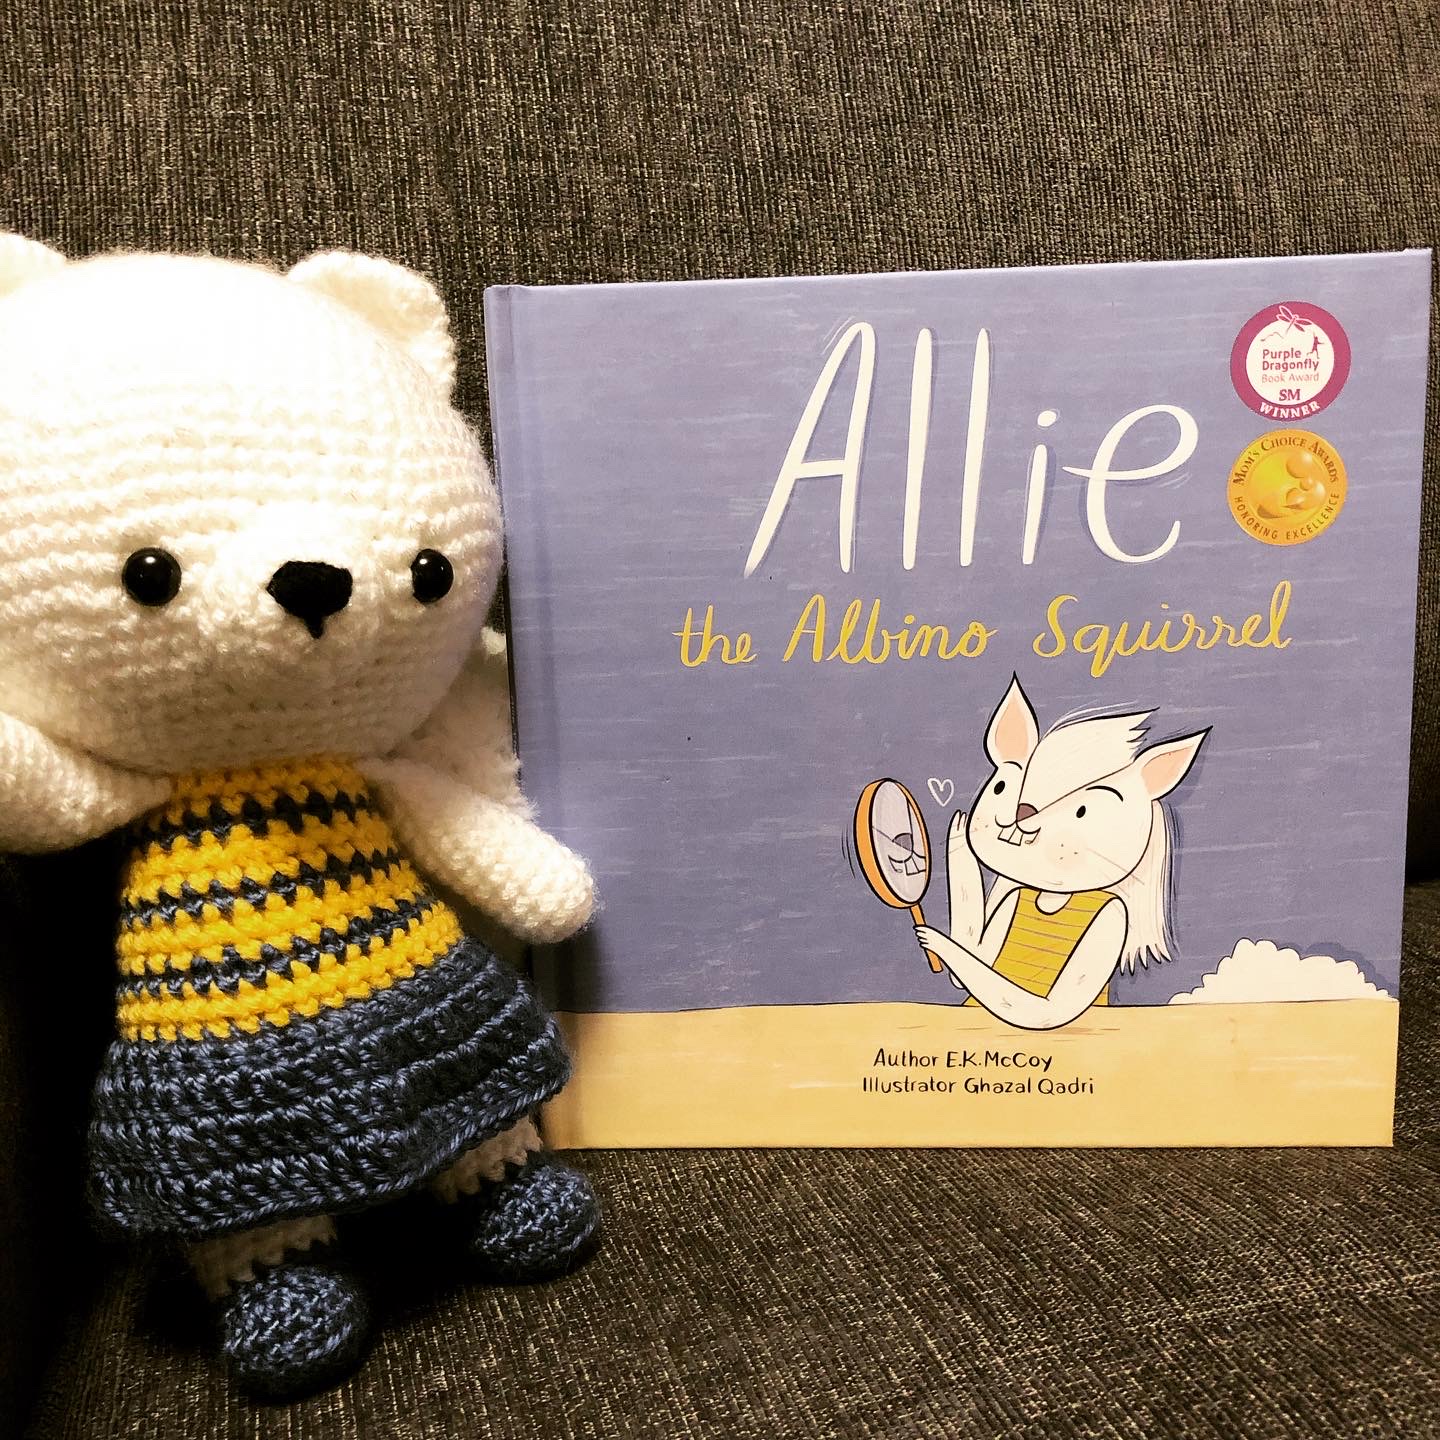 The MCA award-winning book, "Allie the Albino Squirrel," with an Allie stuffed animal!